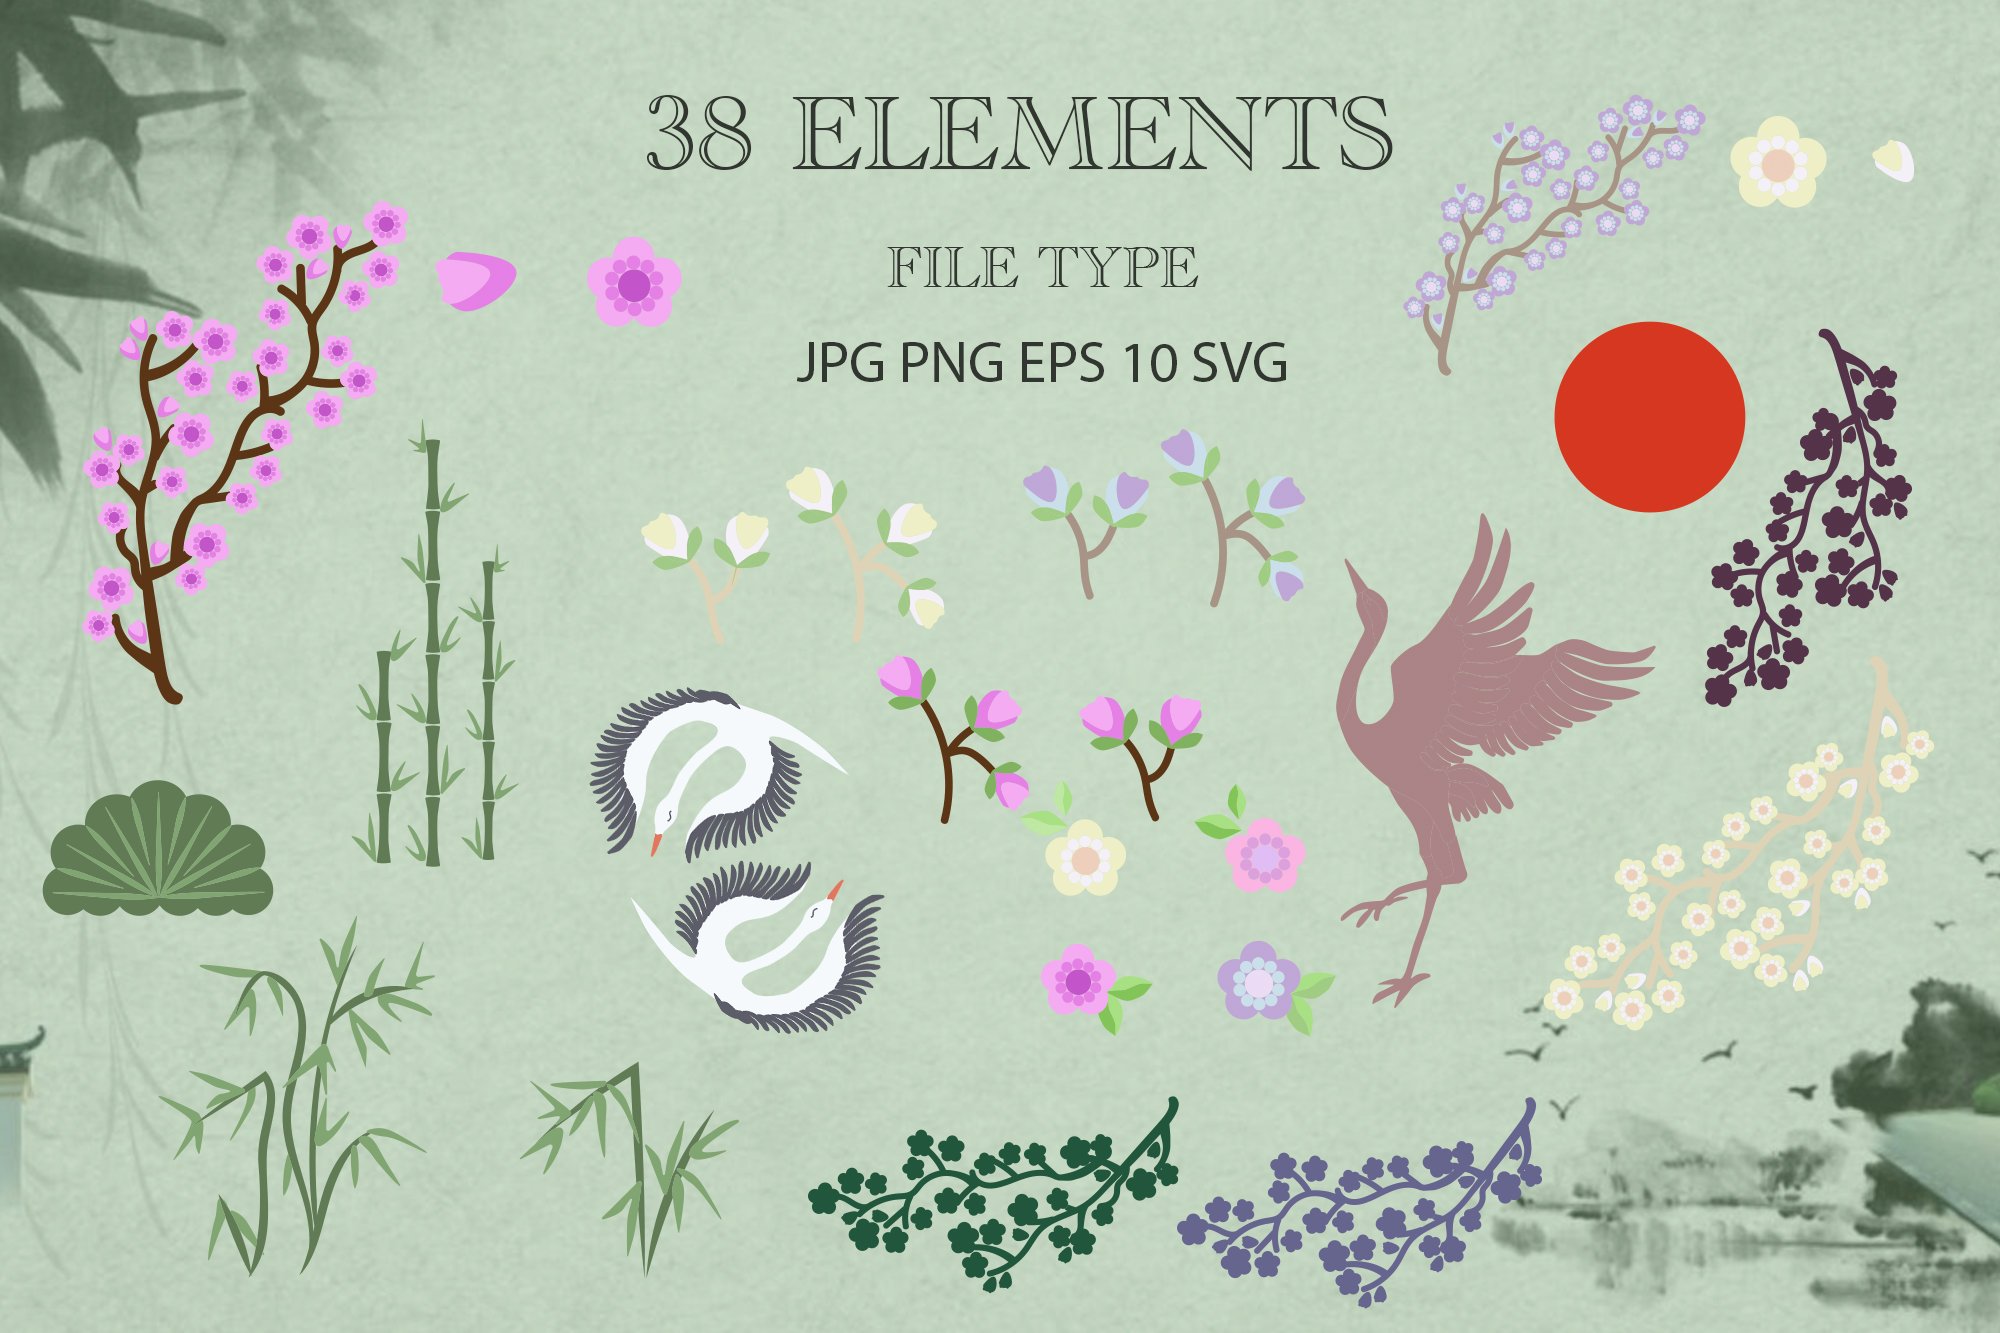 Japanese Cranes - Shadoof preview image.